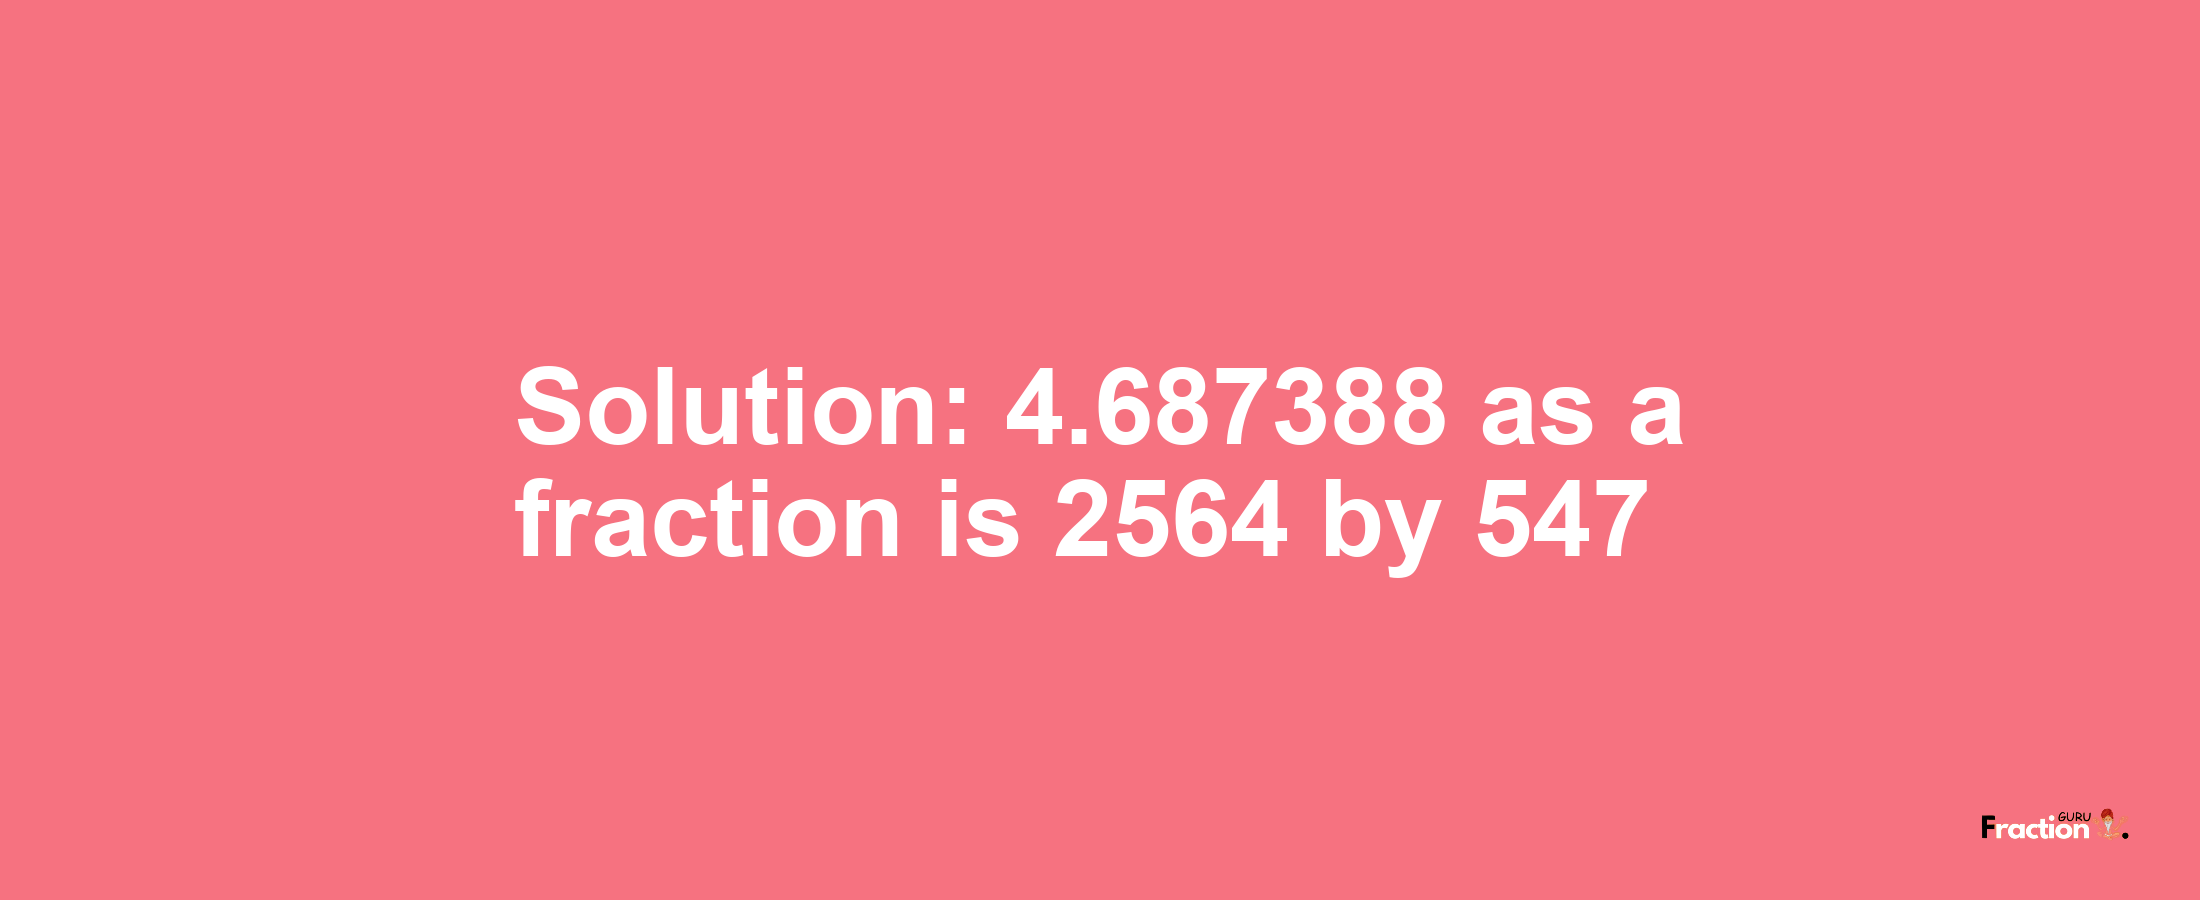 Solution:4.687388 as a fraction is 2564/547